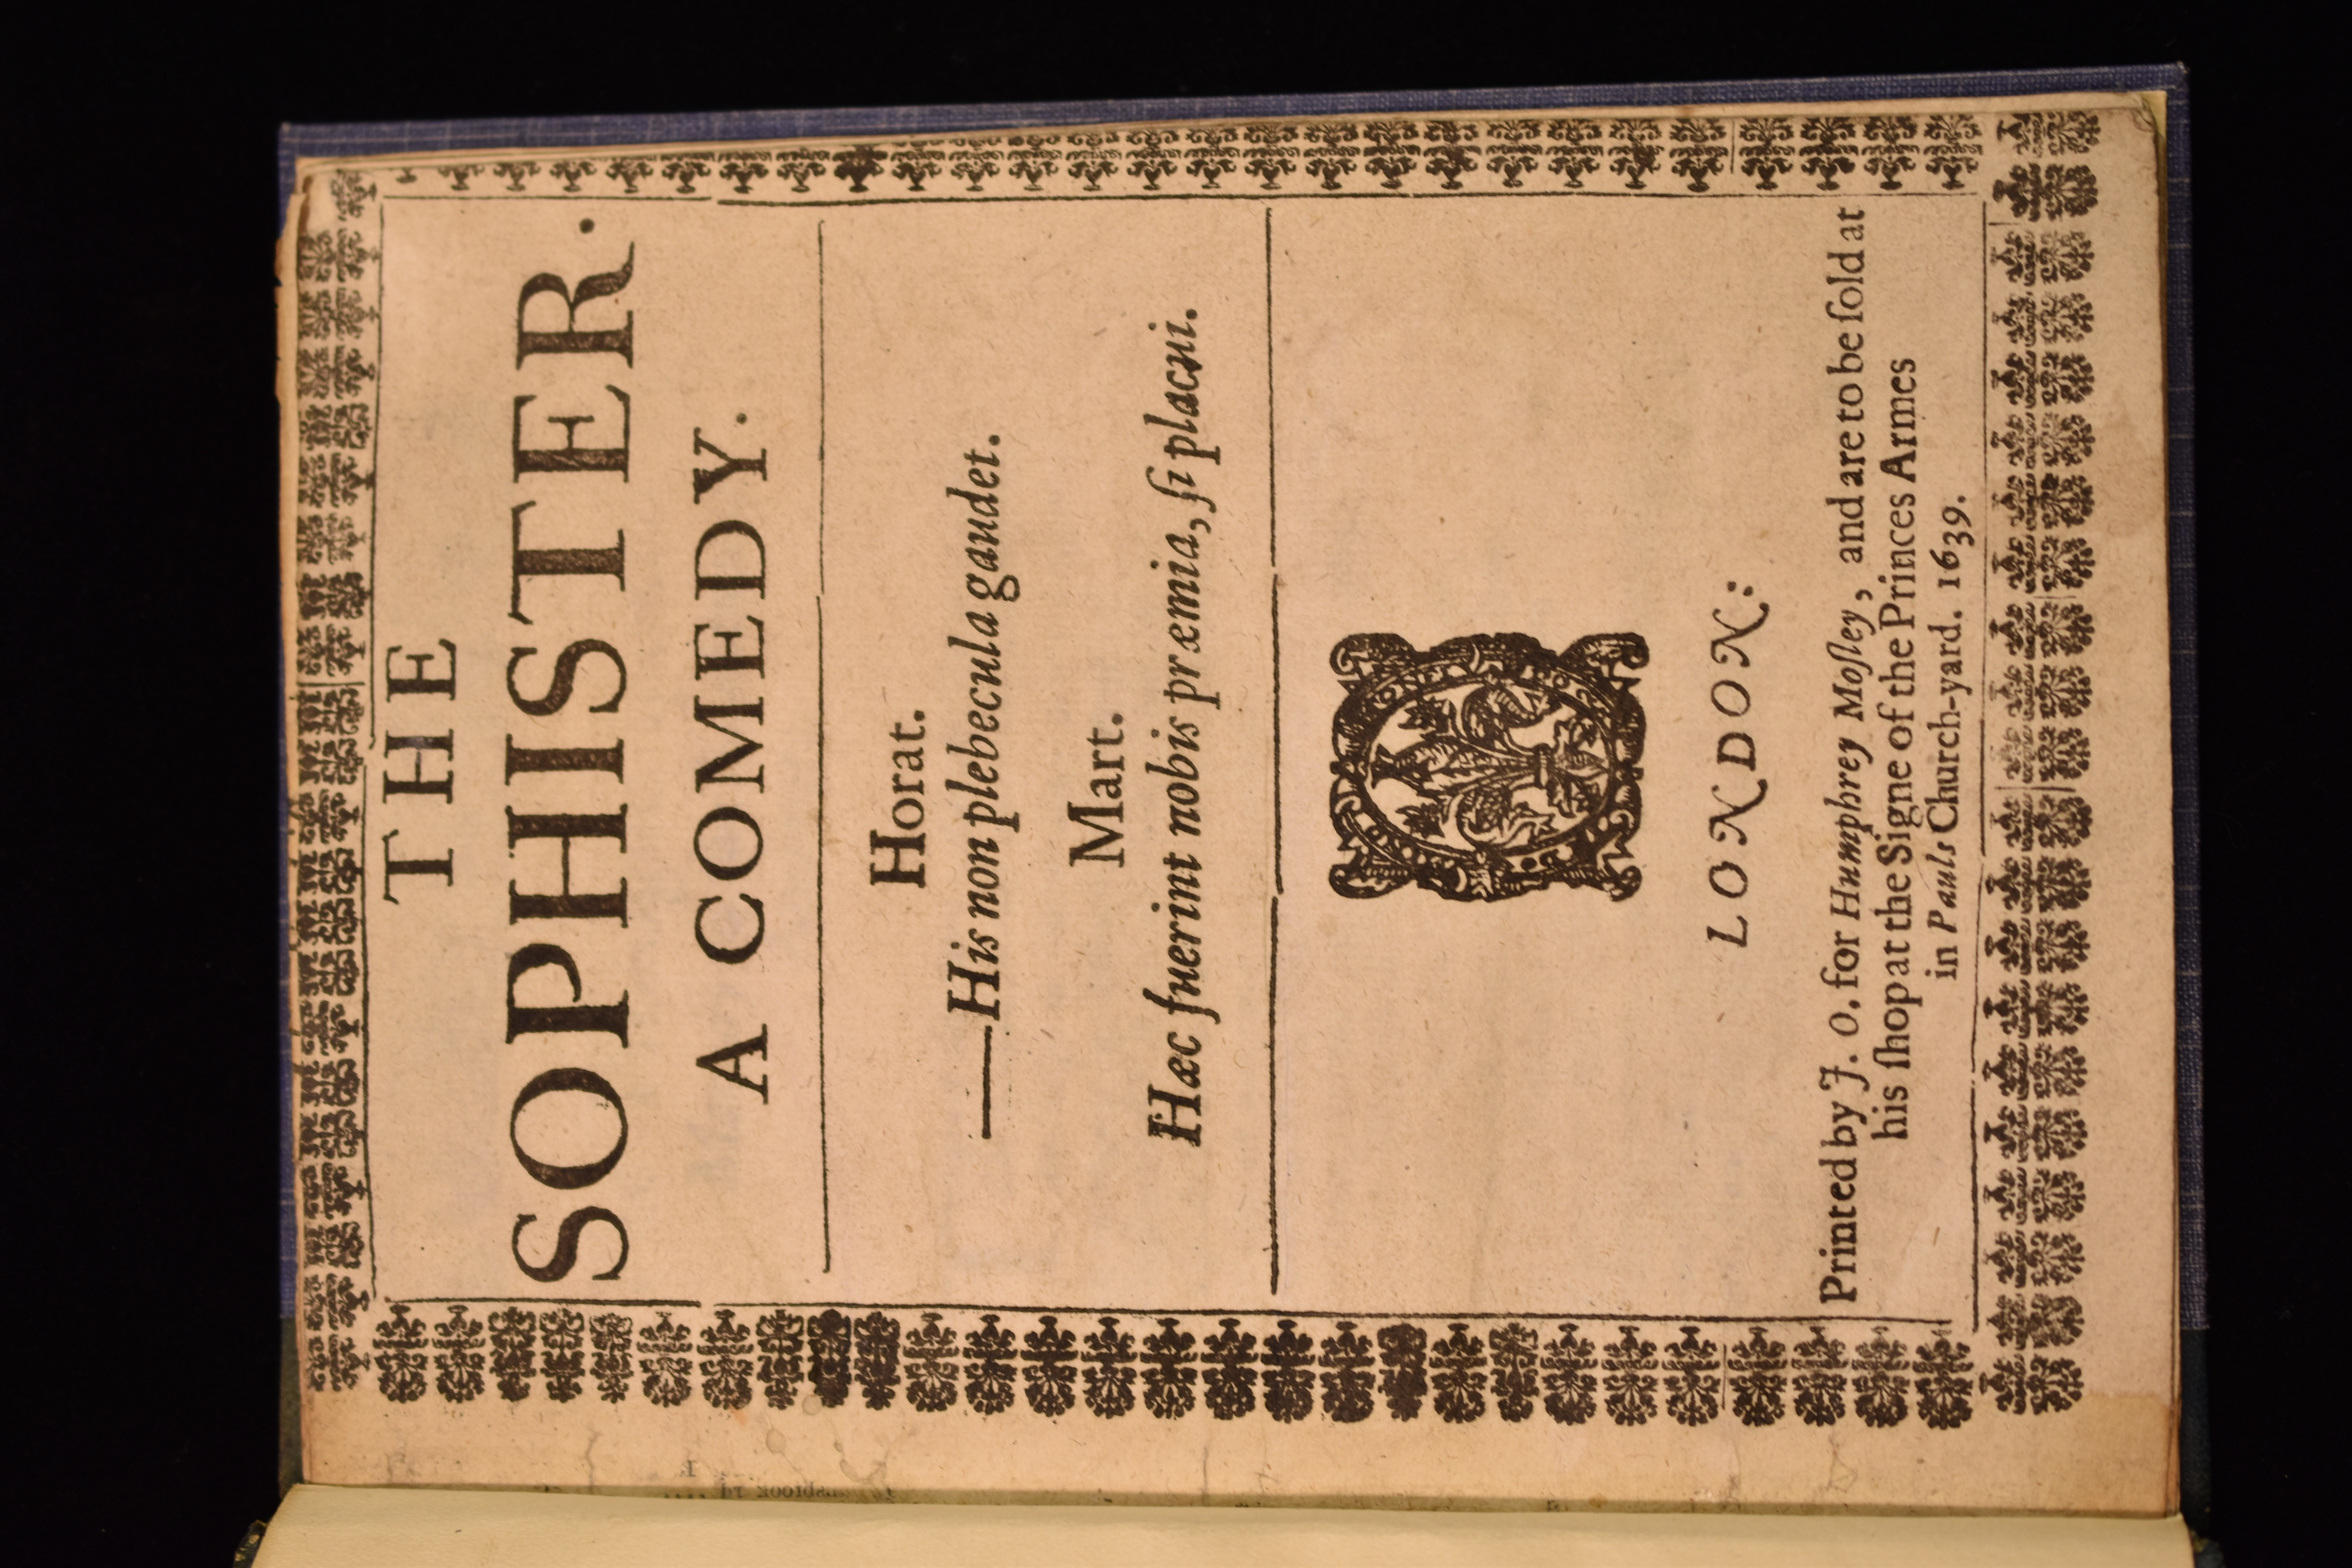 The Sophister title page